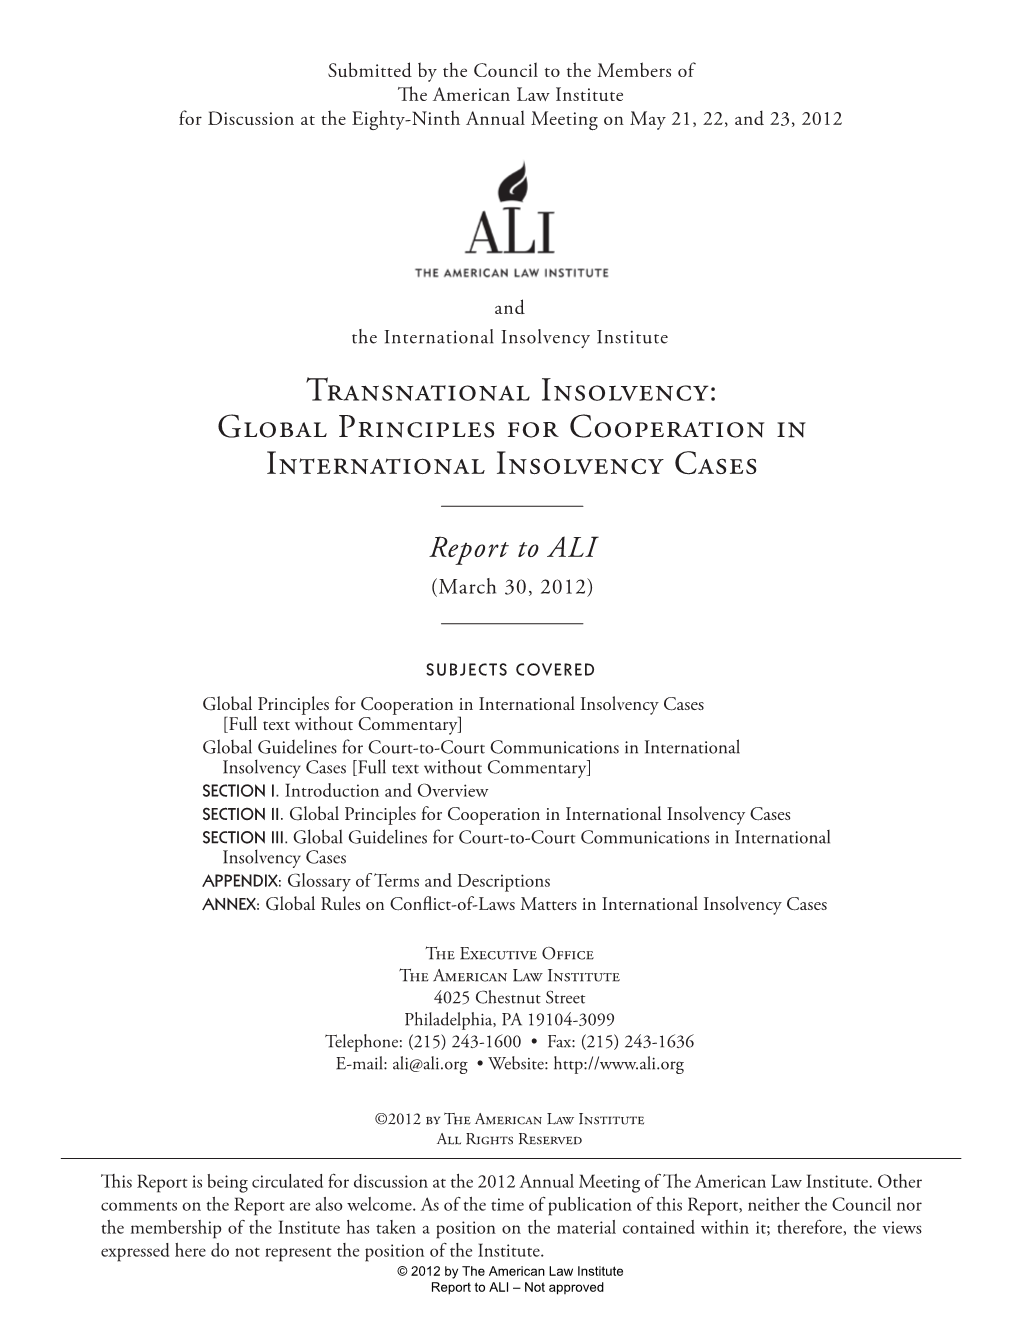 Transnational Insolvency: Global Principles for Cooperation in International Insolvency Cases